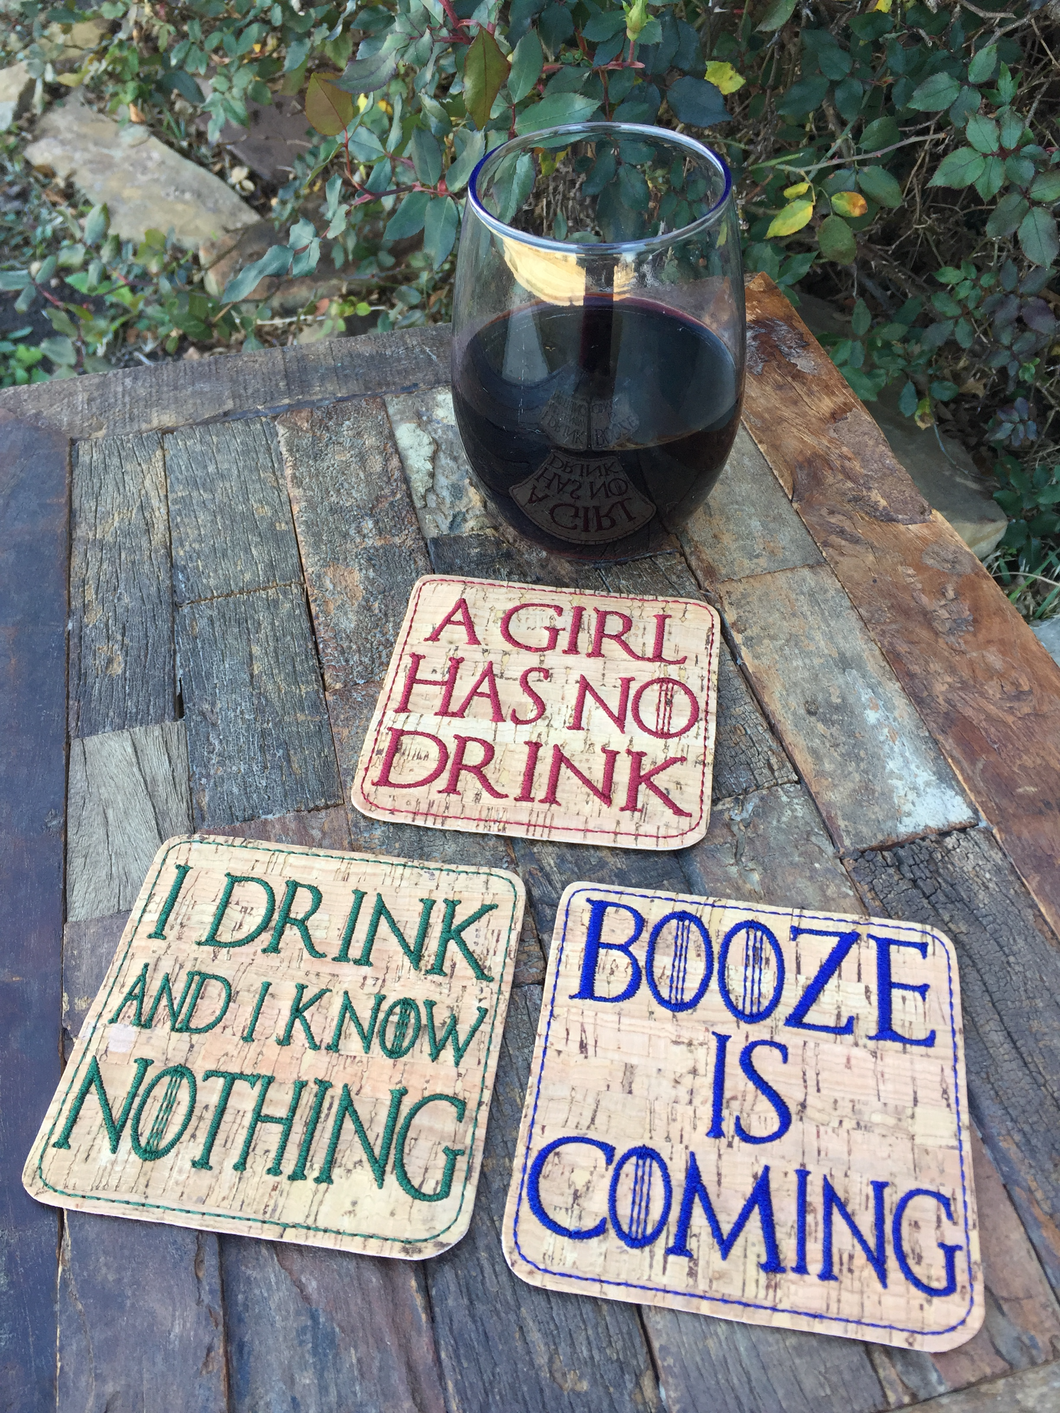 Wine Cork Drink Coasters - Set Of Three - I Drink And I Know Nothing - A Girl Has No Drink - Booze Is Coming